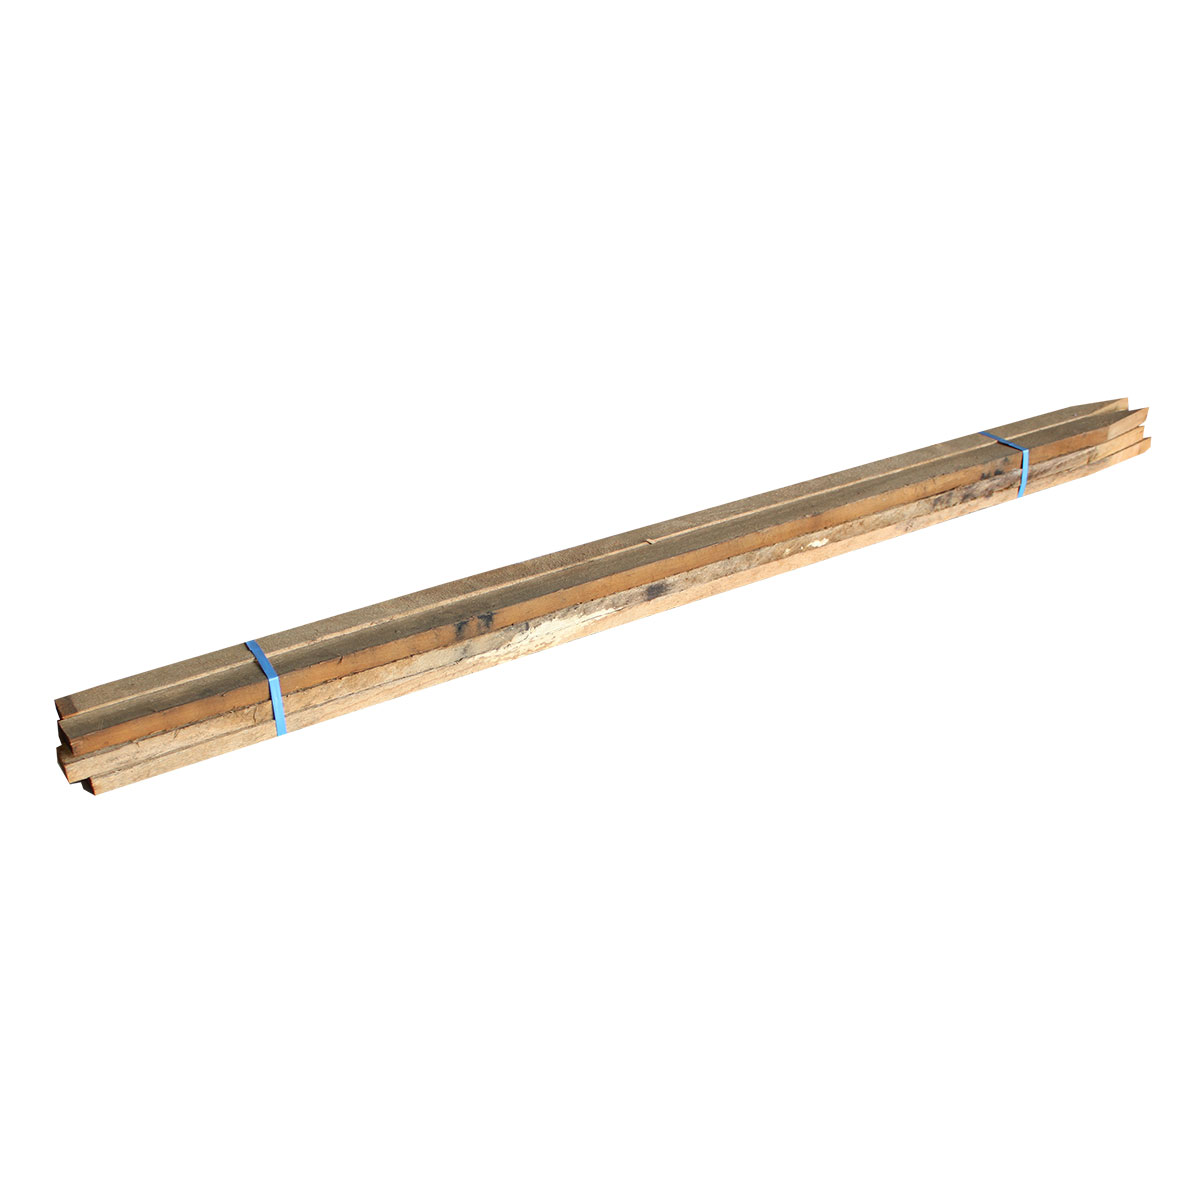 Hardwood Stakes 50 x 25 x 1800mm - 6 Pack